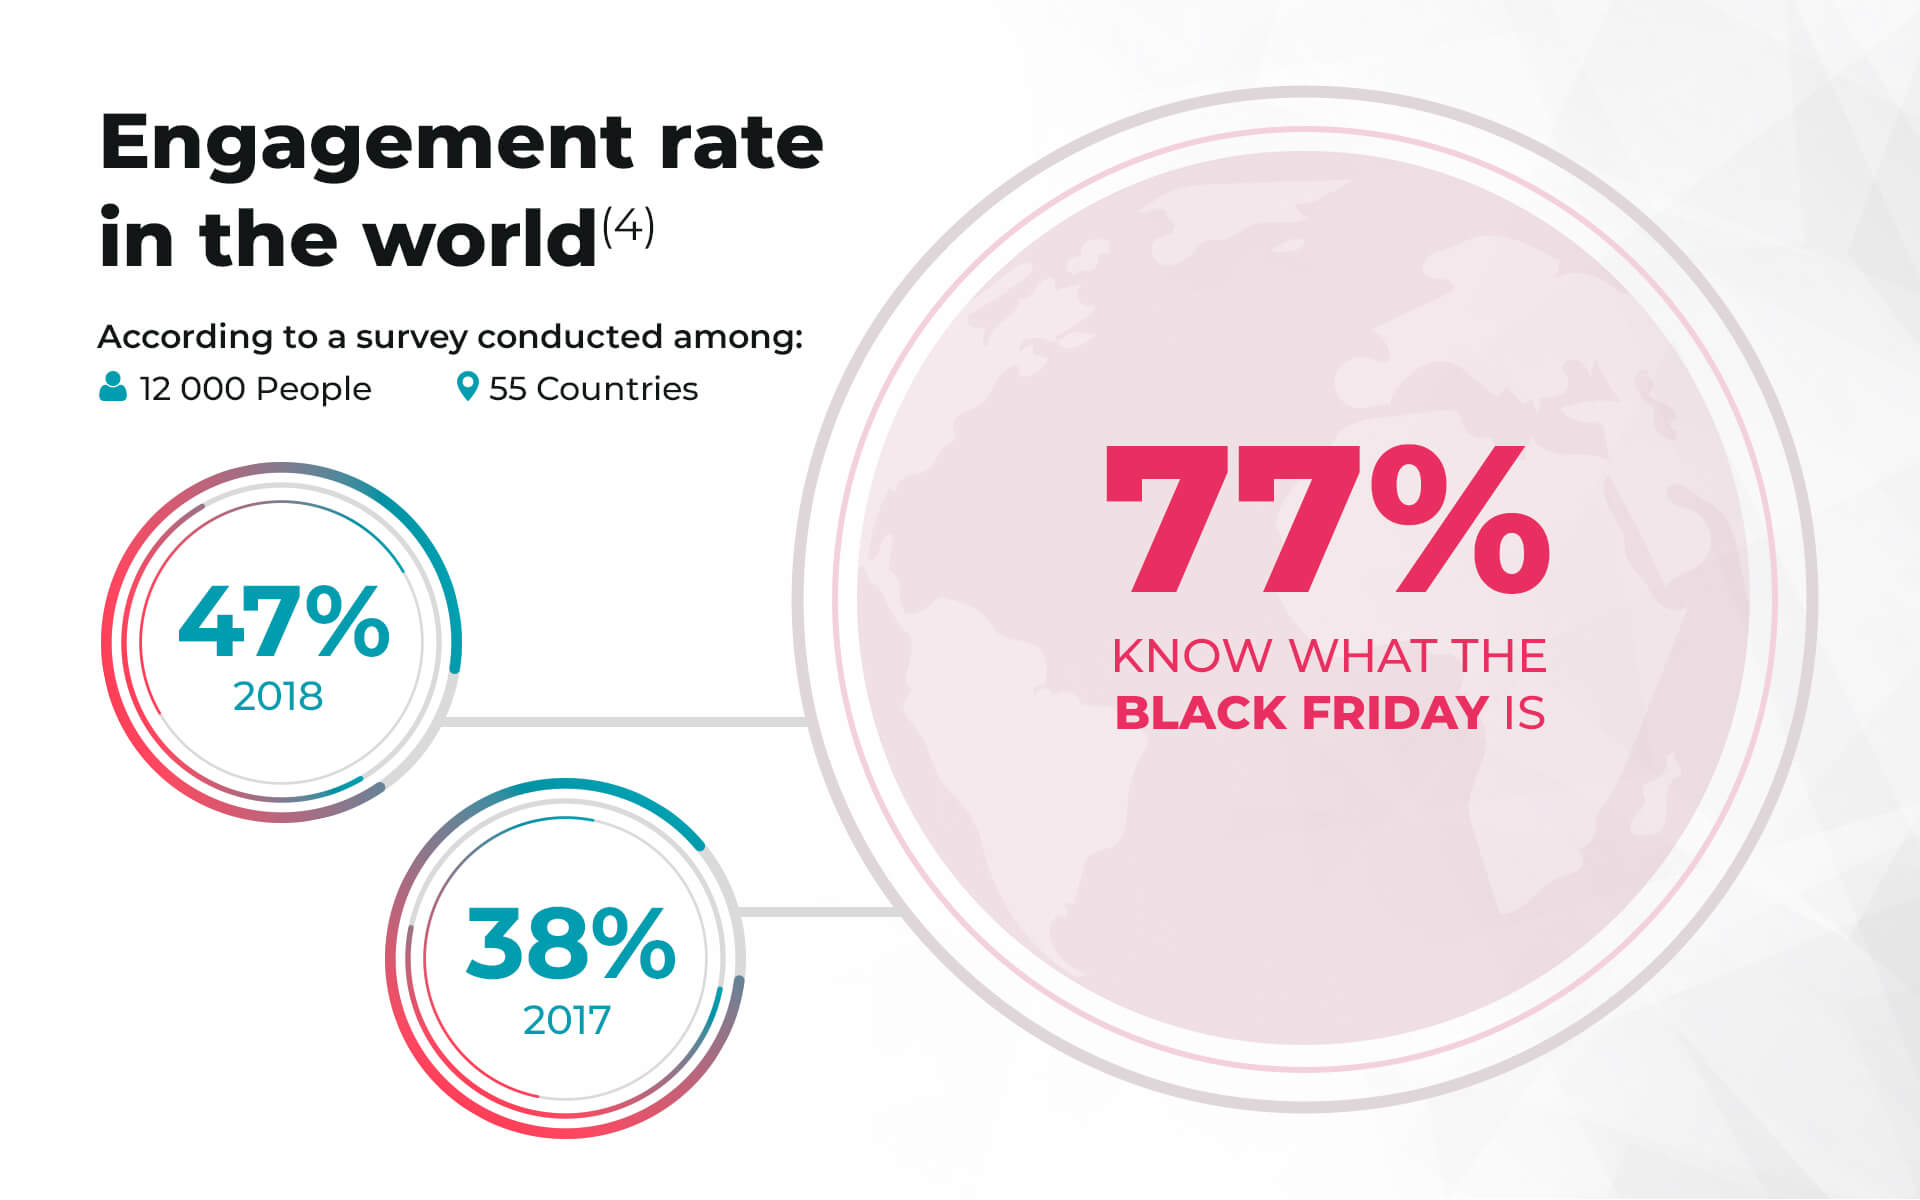 ENGAGEMENT RATE IN THE WORLD. 38% IN 2017 | 47% IN 2018. 77% KNOW WAHT THE BLACK FRIDAY IS